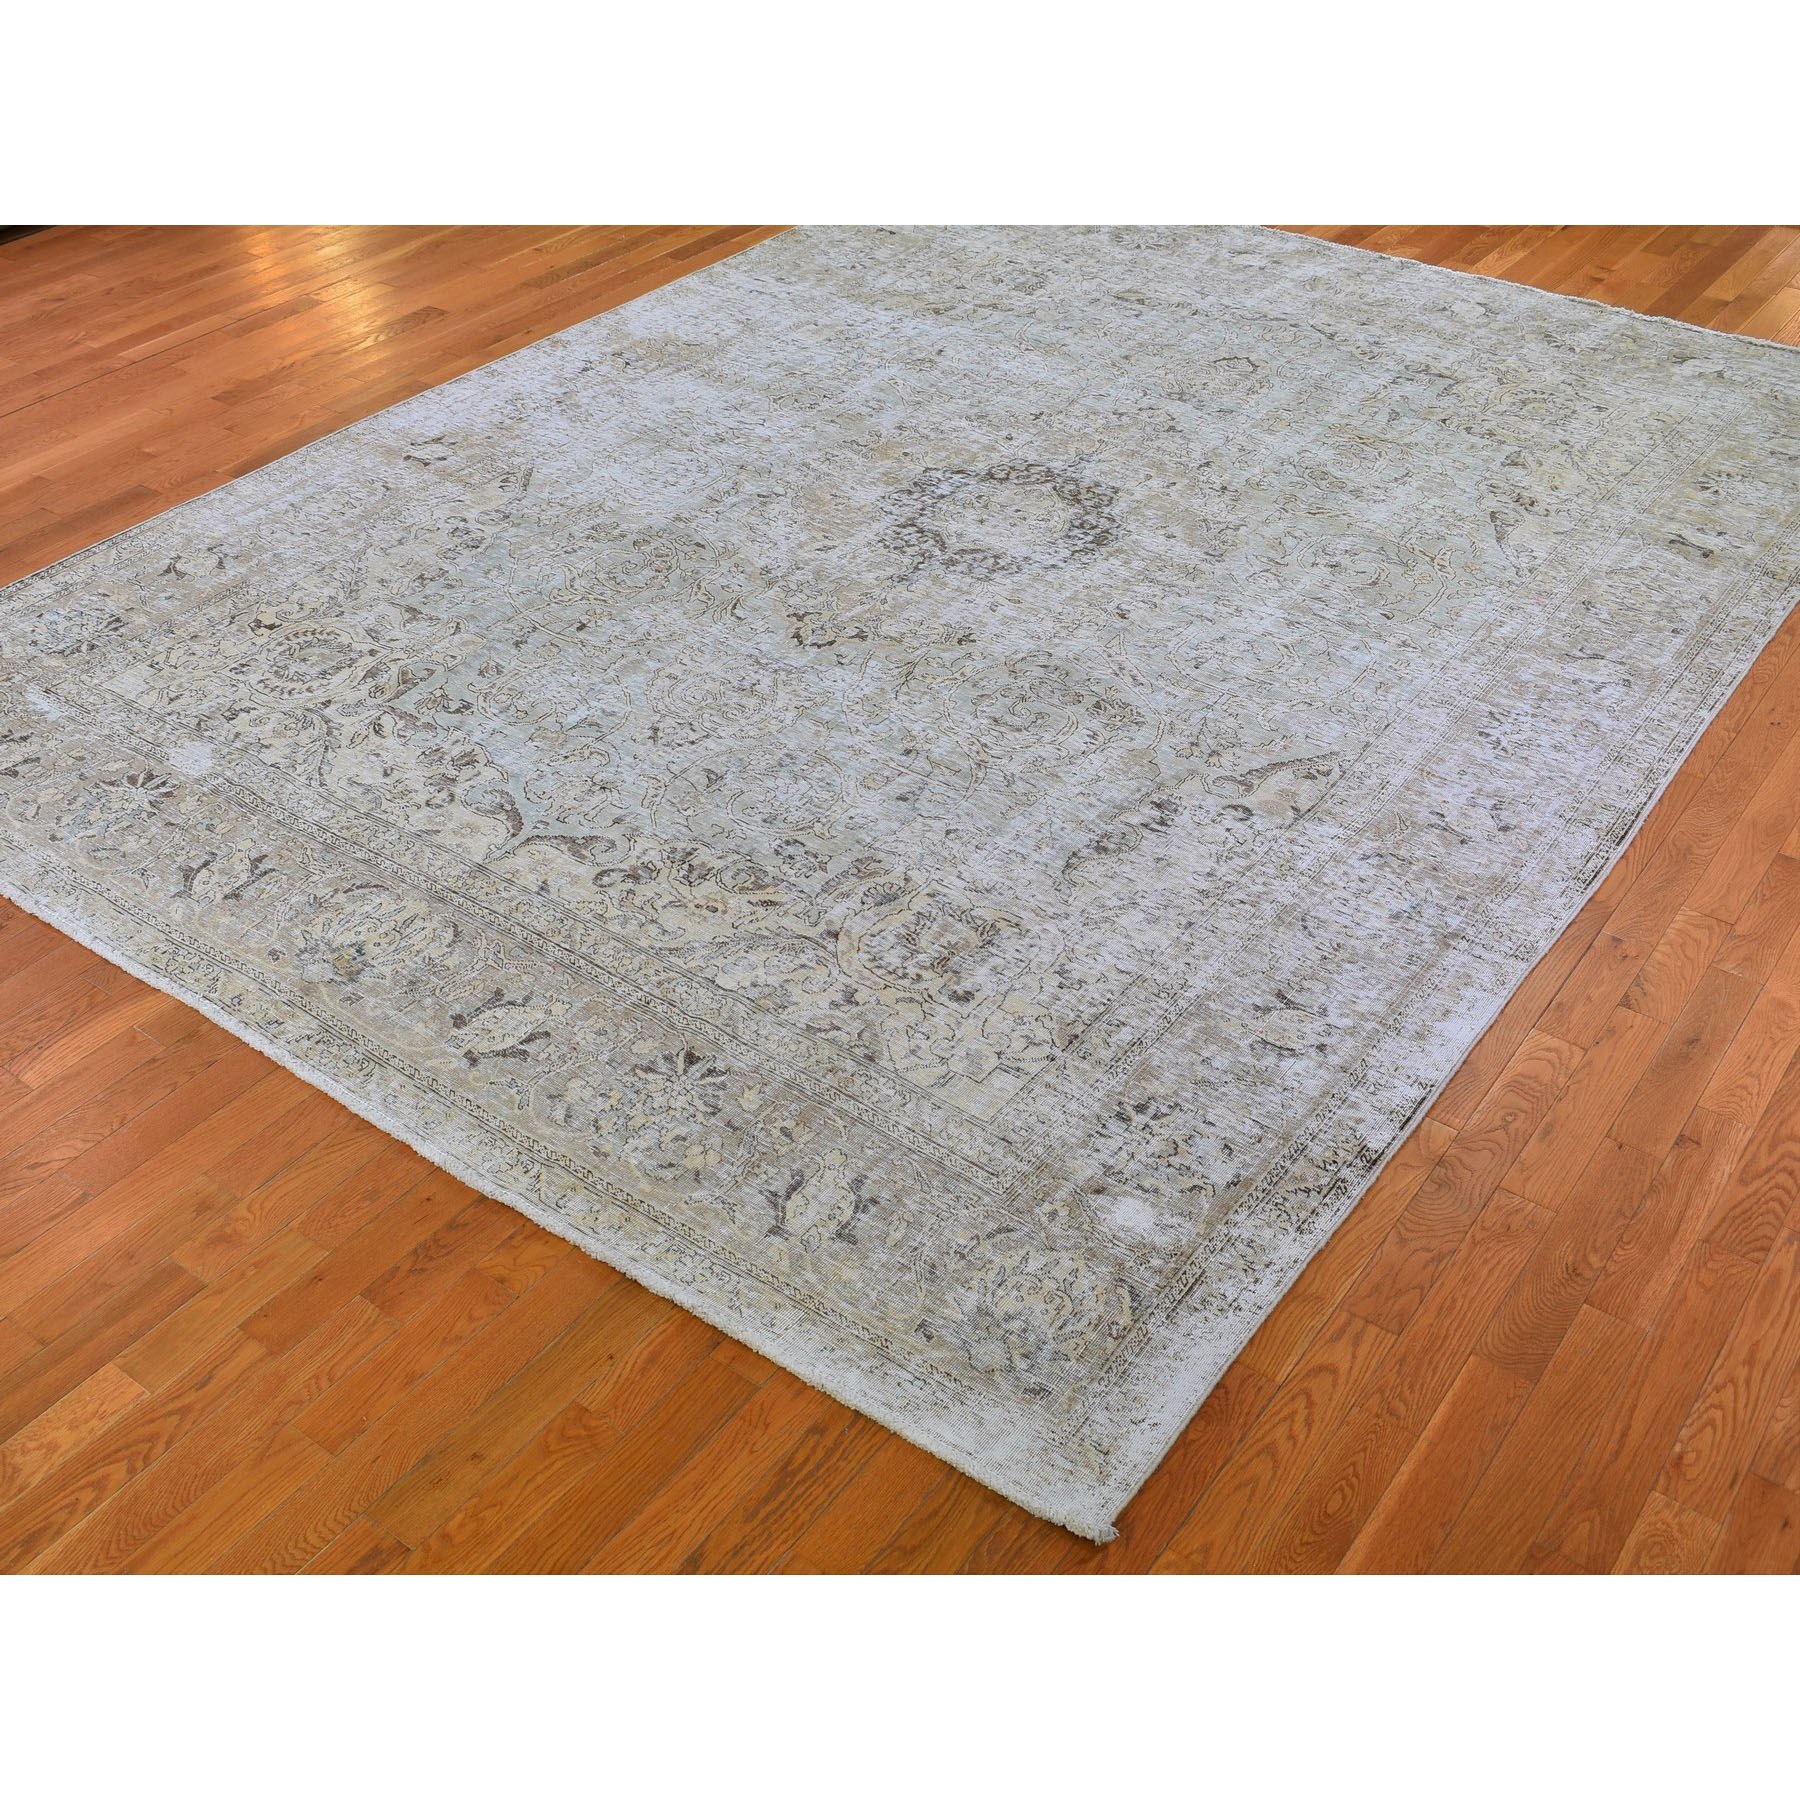 9-8 x13- Gray Vintage Persian Tabriz Worn Pile Hand Knotted Oriental Rug 